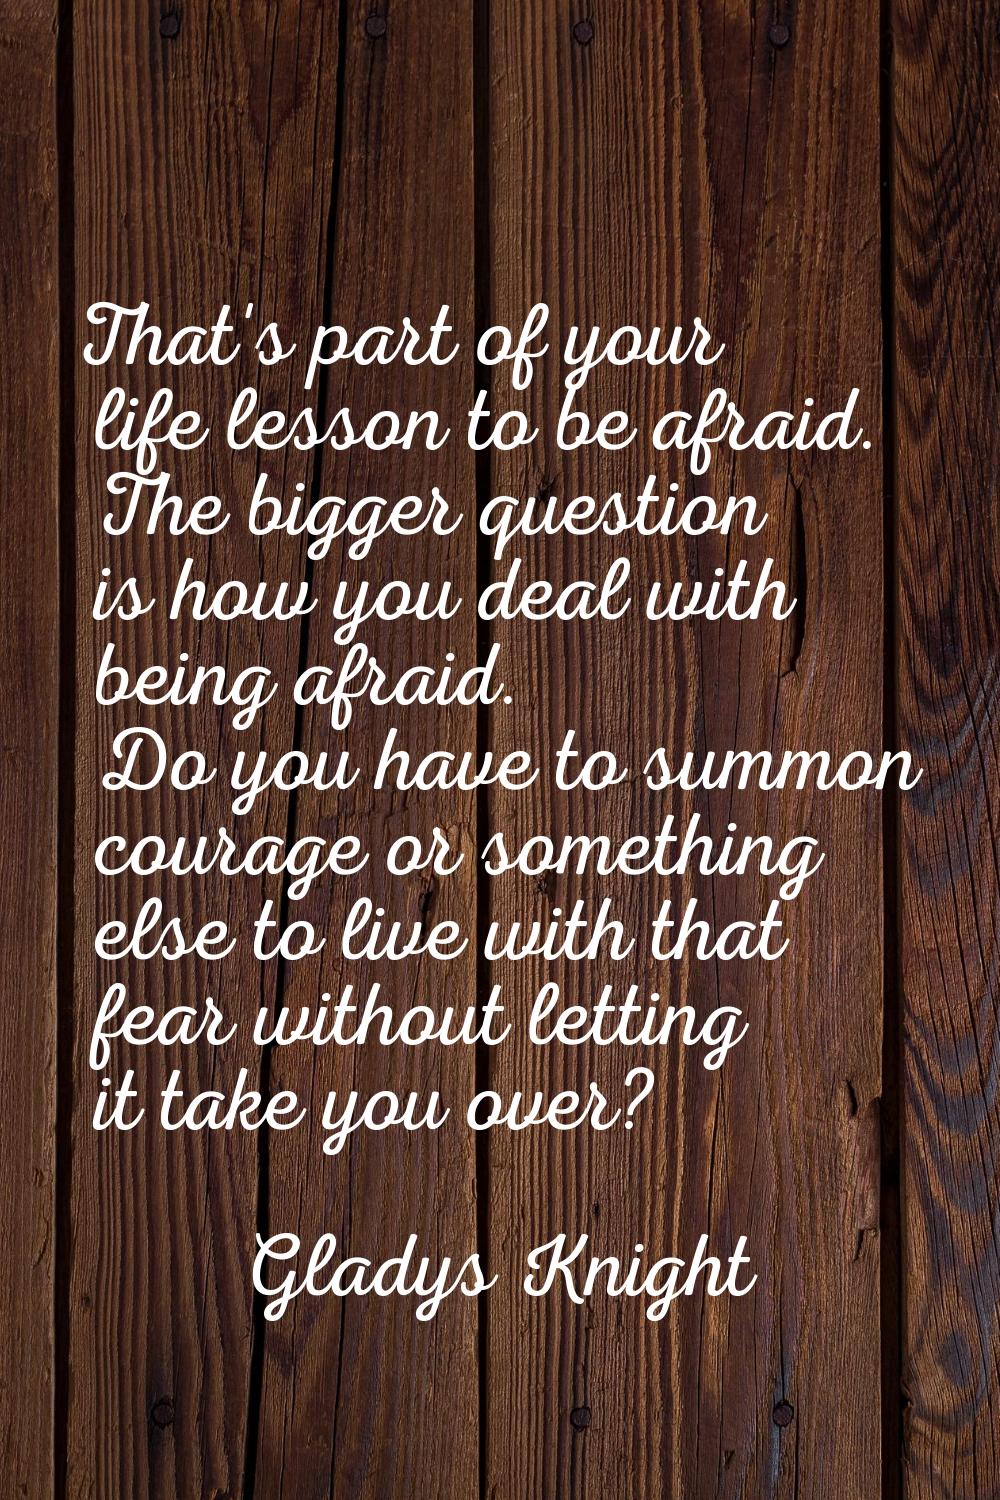 That's part of your life lesson to be afraid. The bigger question is how you deal with being afraid